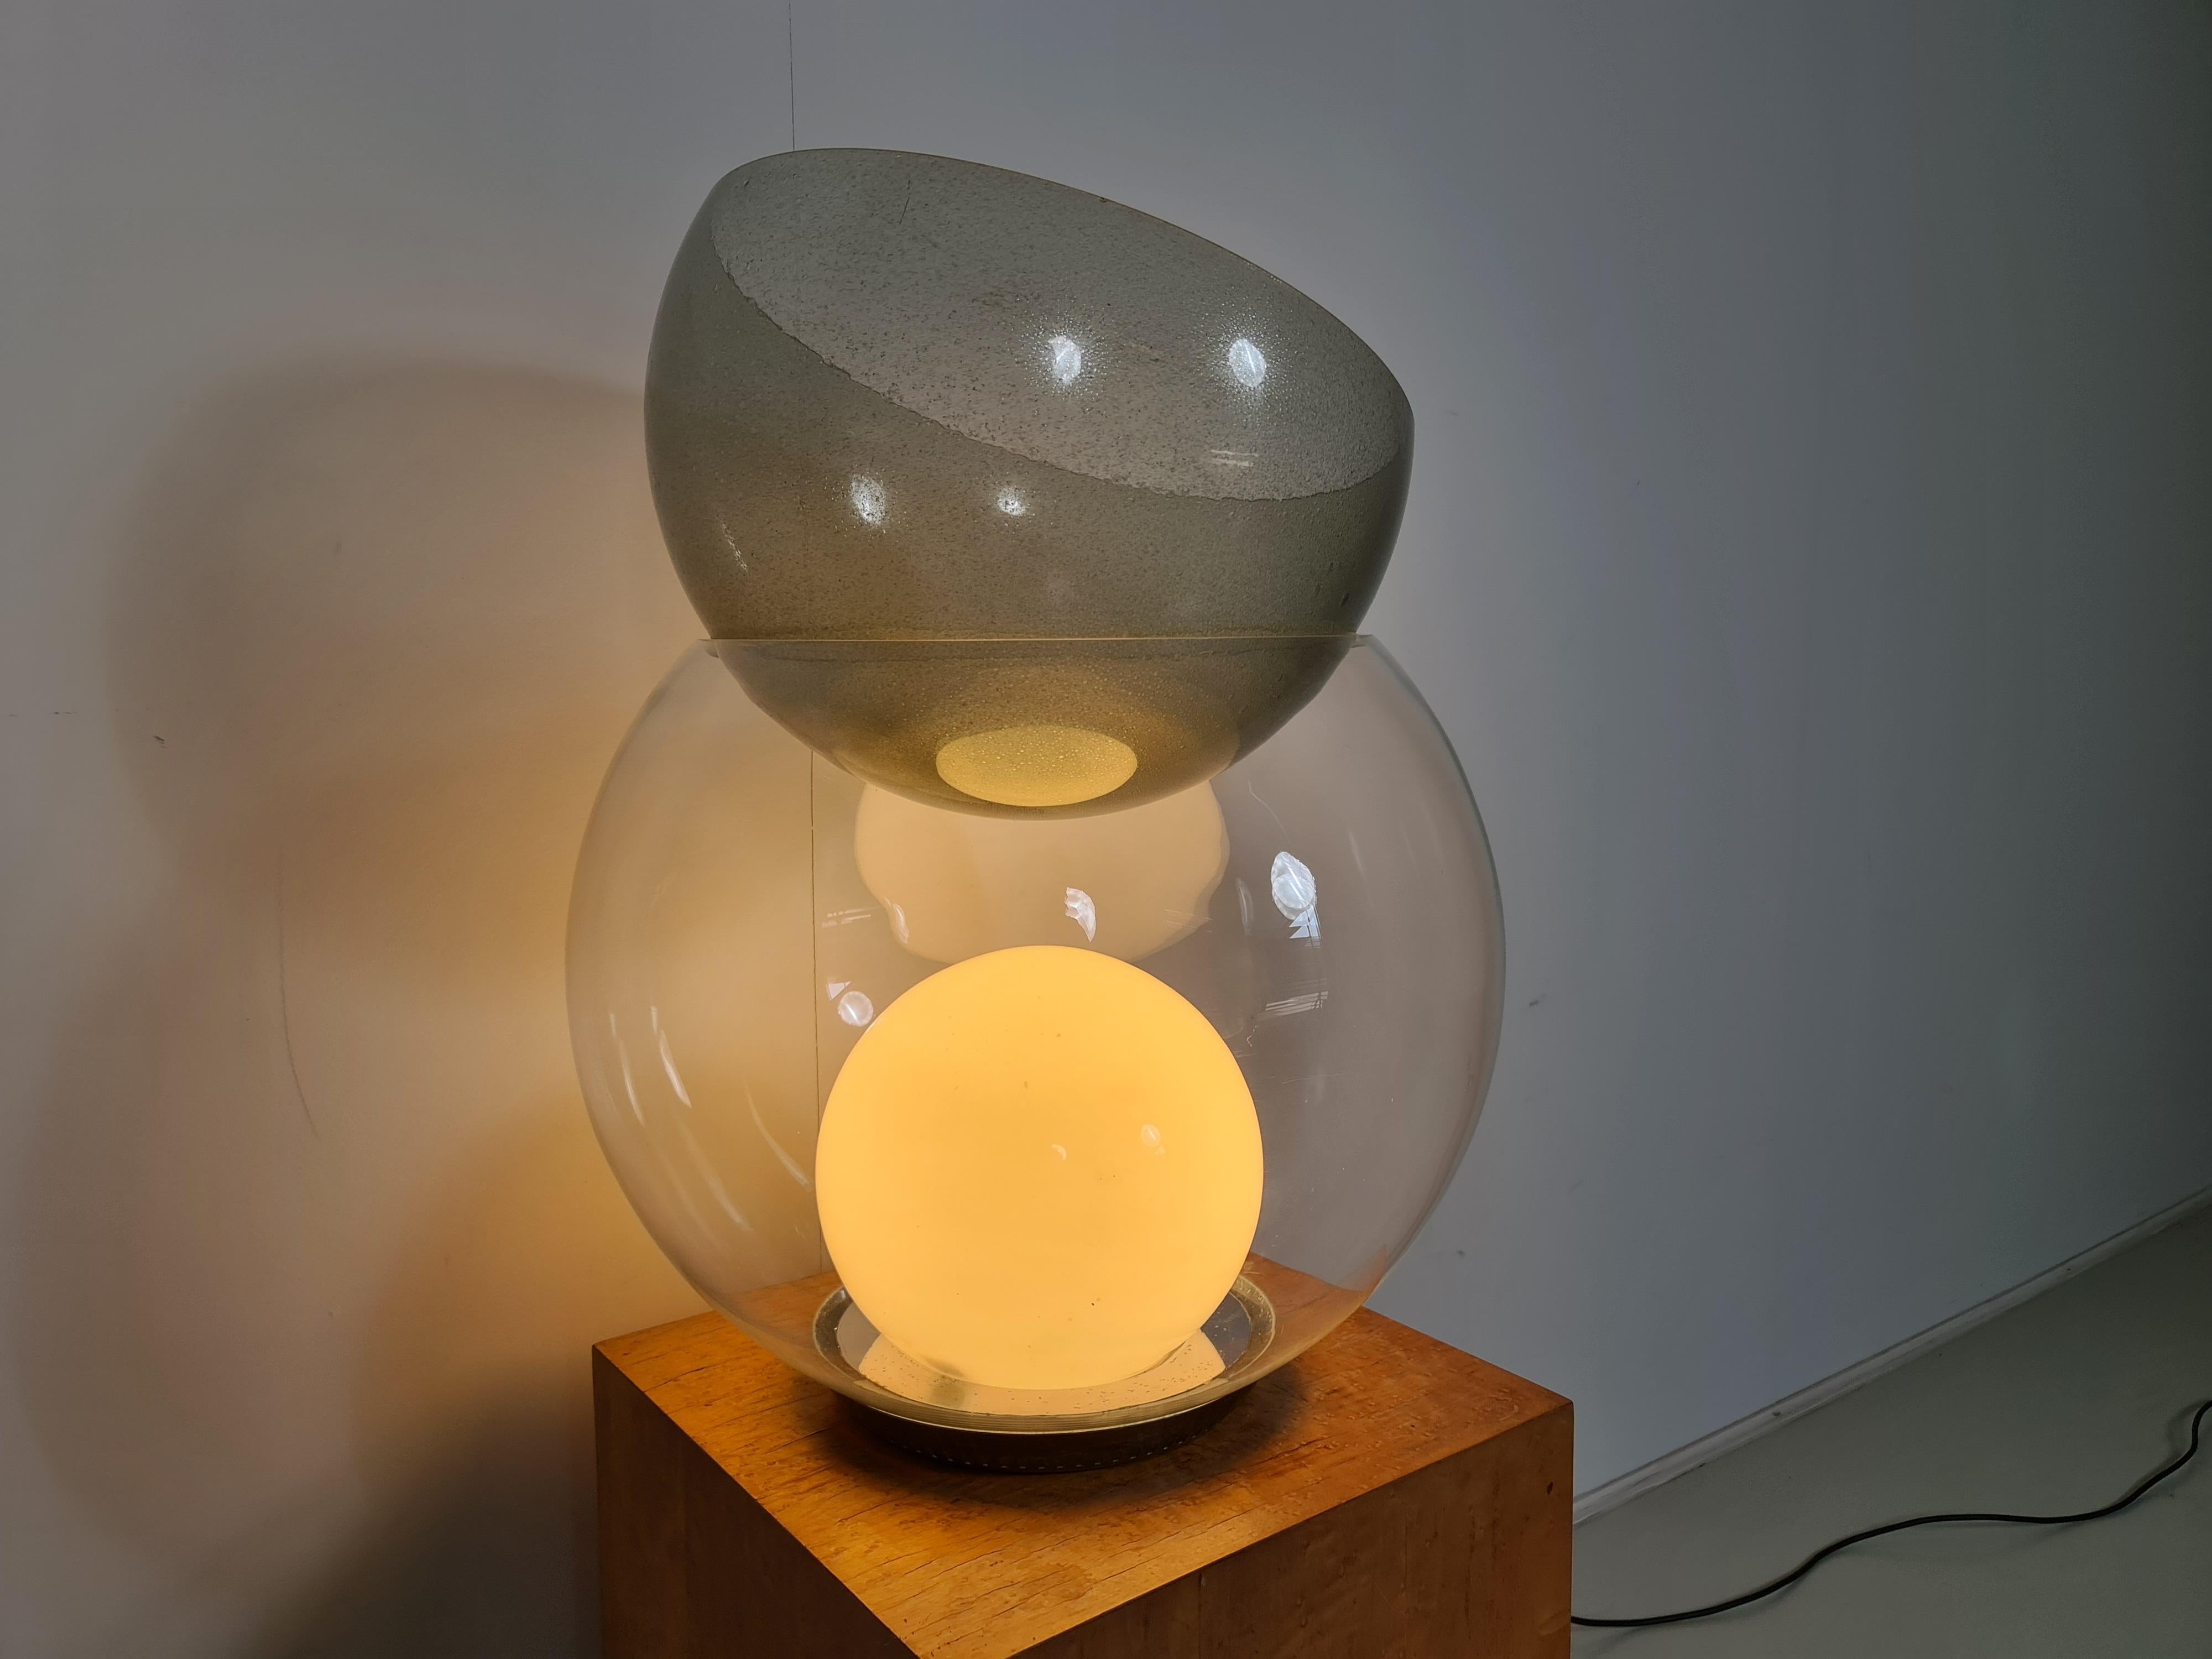 Giova table lamp by Gae Aulenti for FontanaArte, 1960. 
A luminous sculpture in glass that can be even a centerpiece to your interior. This first edition Giova give lamp has a chromed metal base. The lamp contains a middle globe in transparent